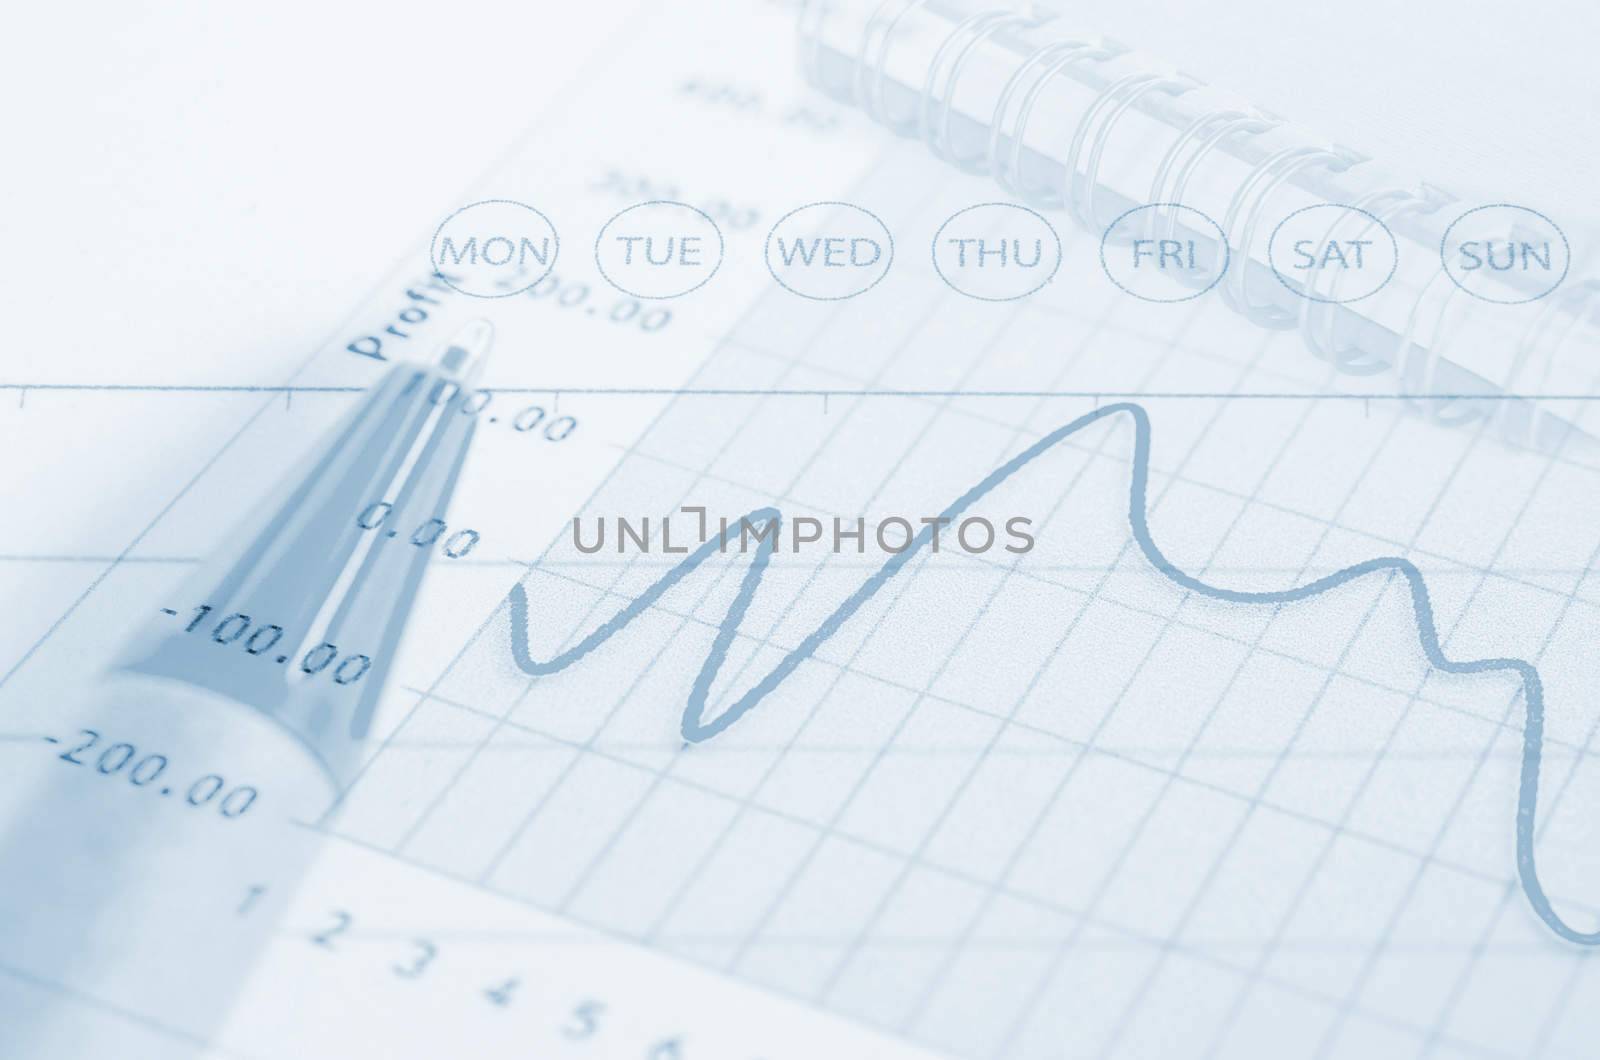 Business graph analysis report. Accounting